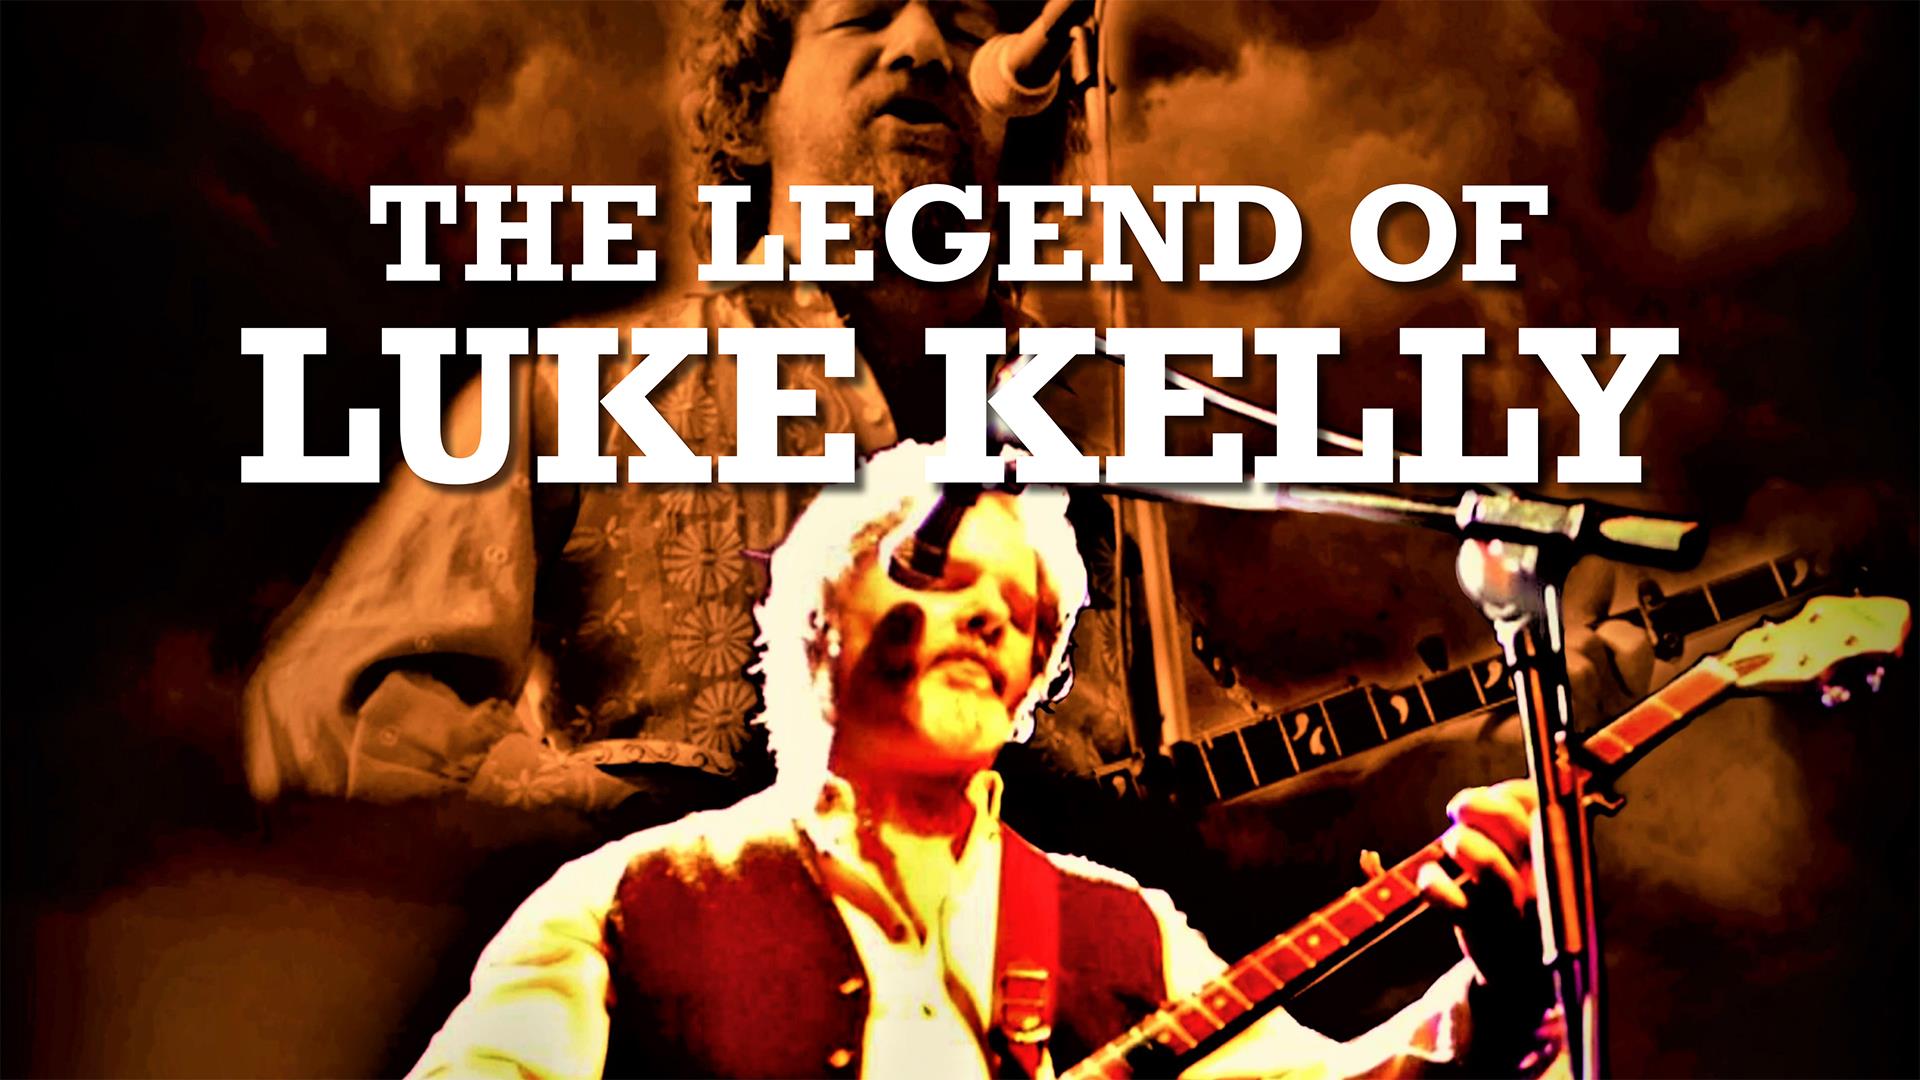 Image shows a man playing a guitar with the words 'The Legend of Luke Kelly' written above